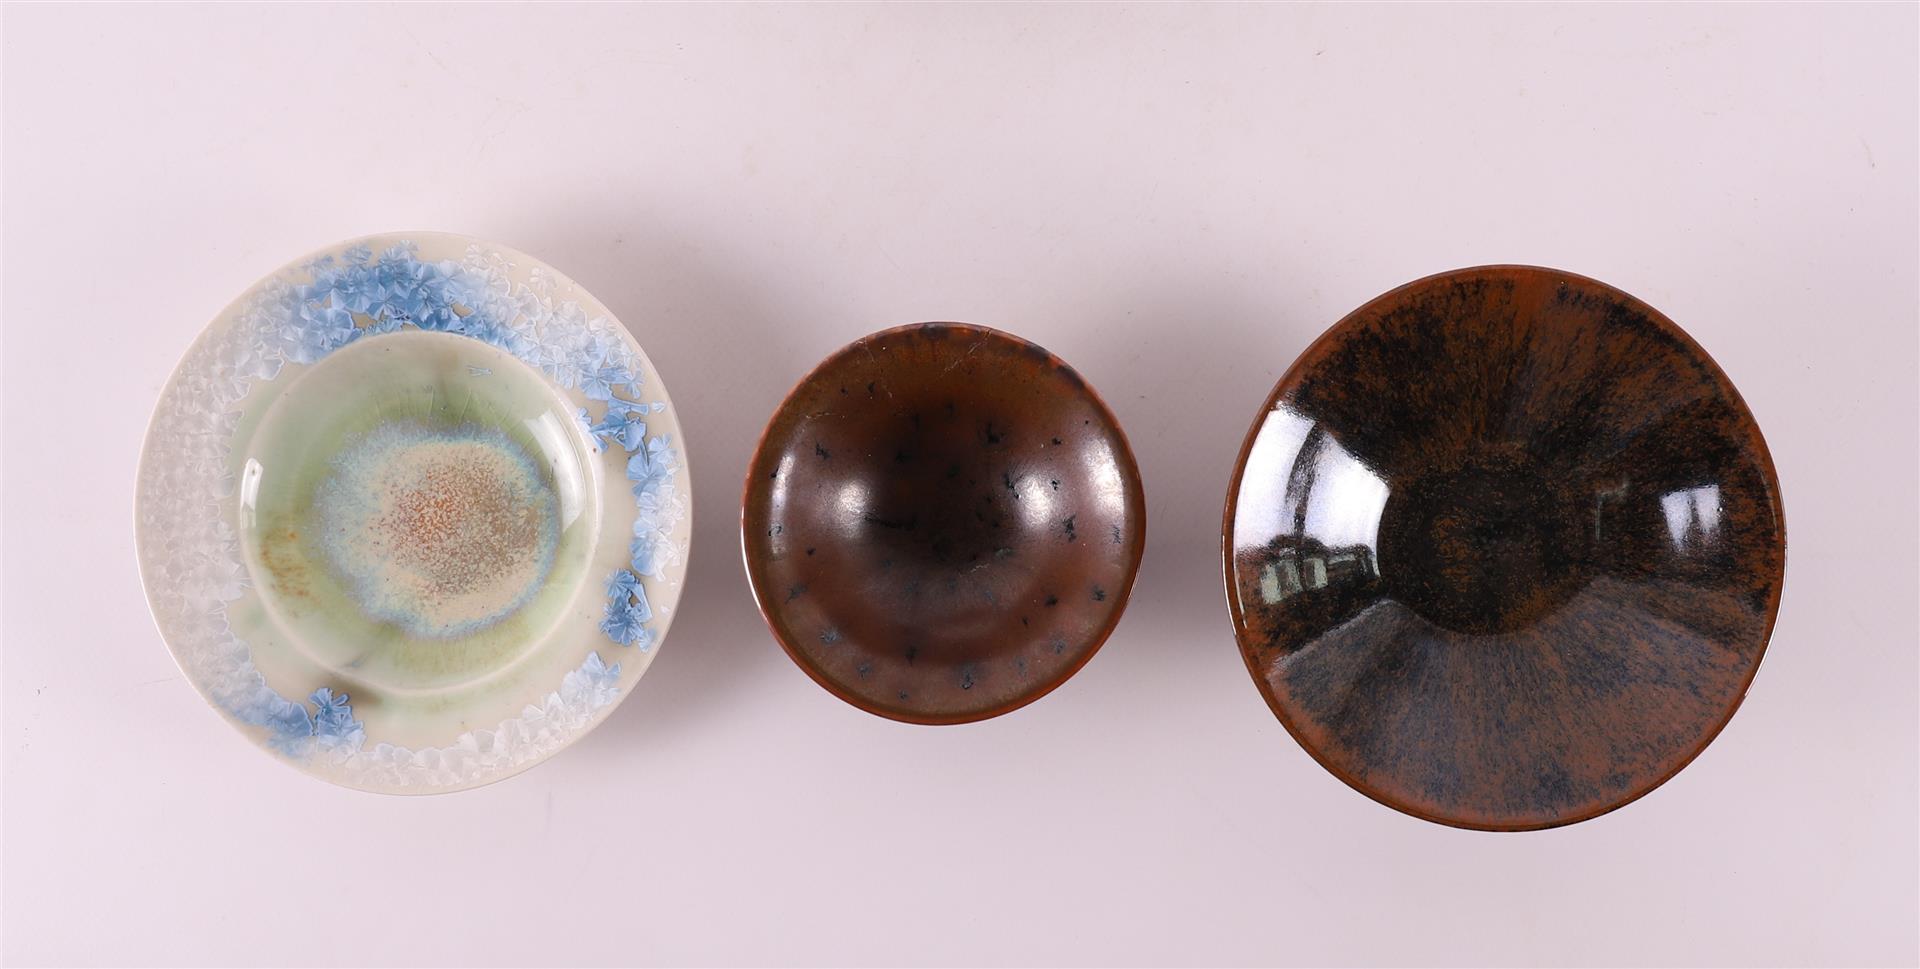 Four porcelain dishes, all designed by Johan Broekema (1943-2010). - Image 3 of 8